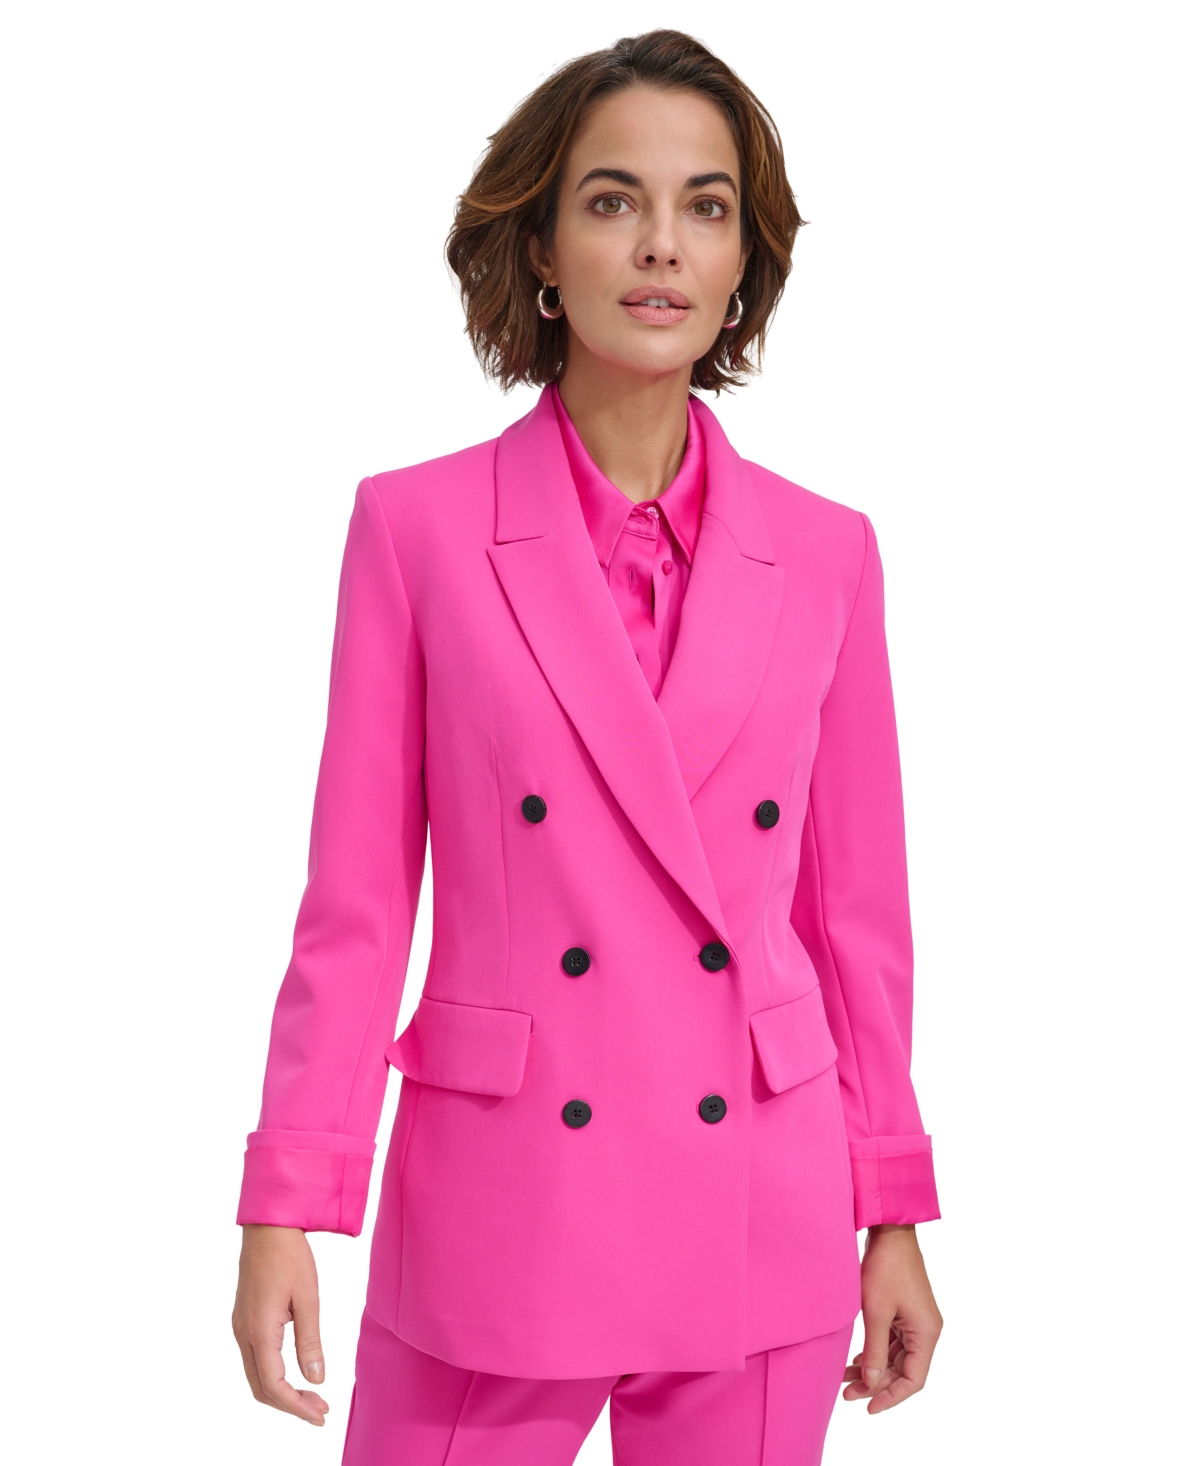 Dkny Women's Double-Breasted Jacket - Radiant Pink | Smart Closet